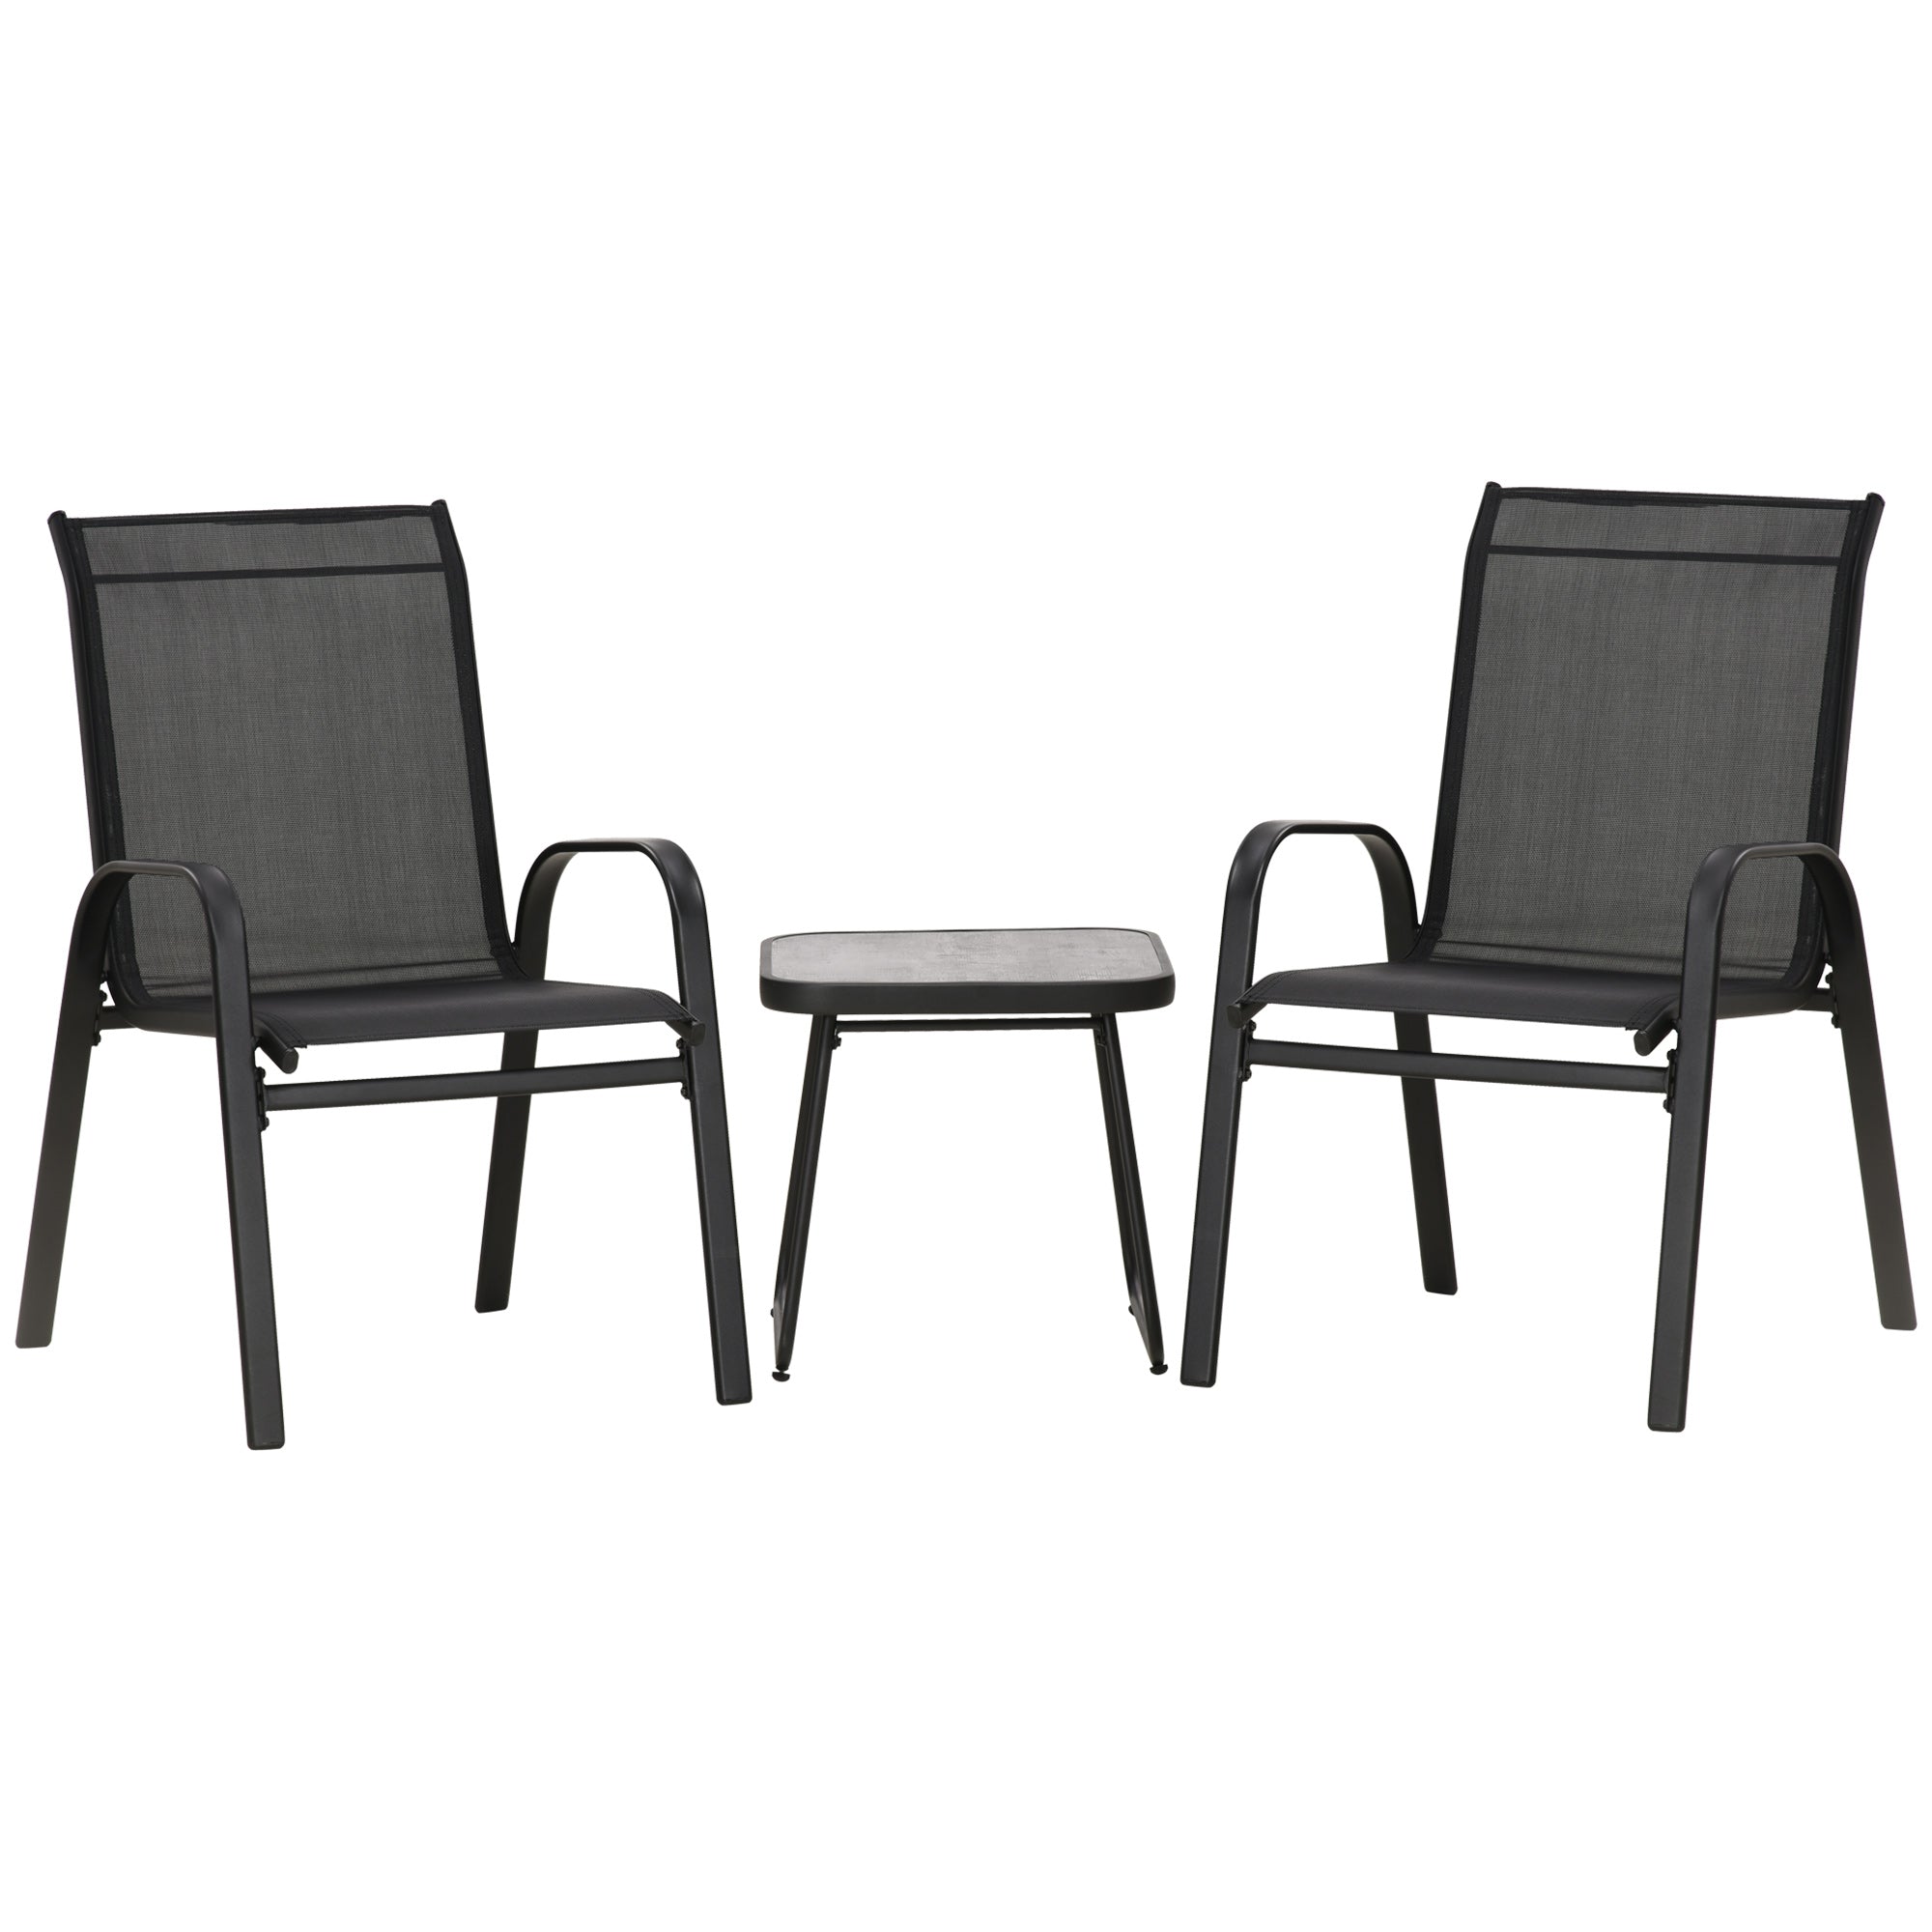 3 Pieces Outdoot Bistro Set, Patio Stackable Armchairs with Breathable Mesh Fabric and PSC Board Coffee Table, Black-0